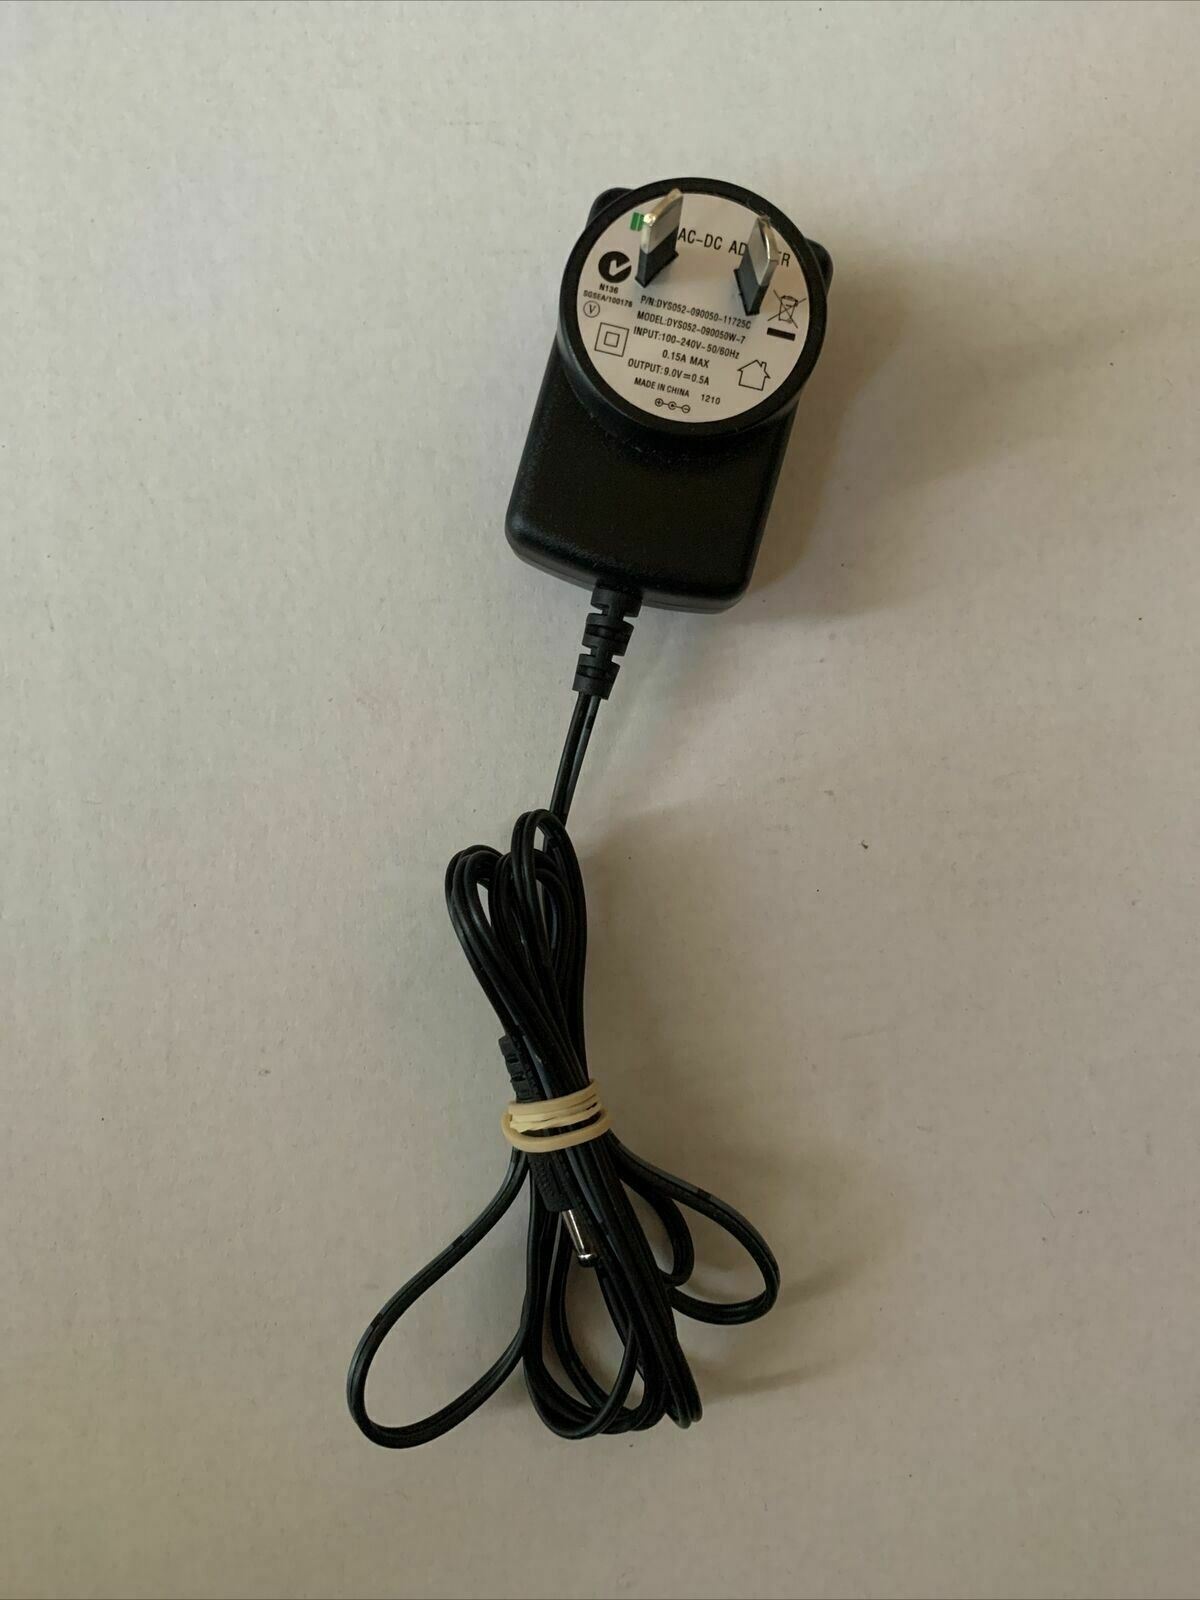 DYS AC/DC Adapter DYS052-090050W-7 9v 0.5a Power Adapter Colour: Black Type: AC/DC Adapter Compatible Model: Unive